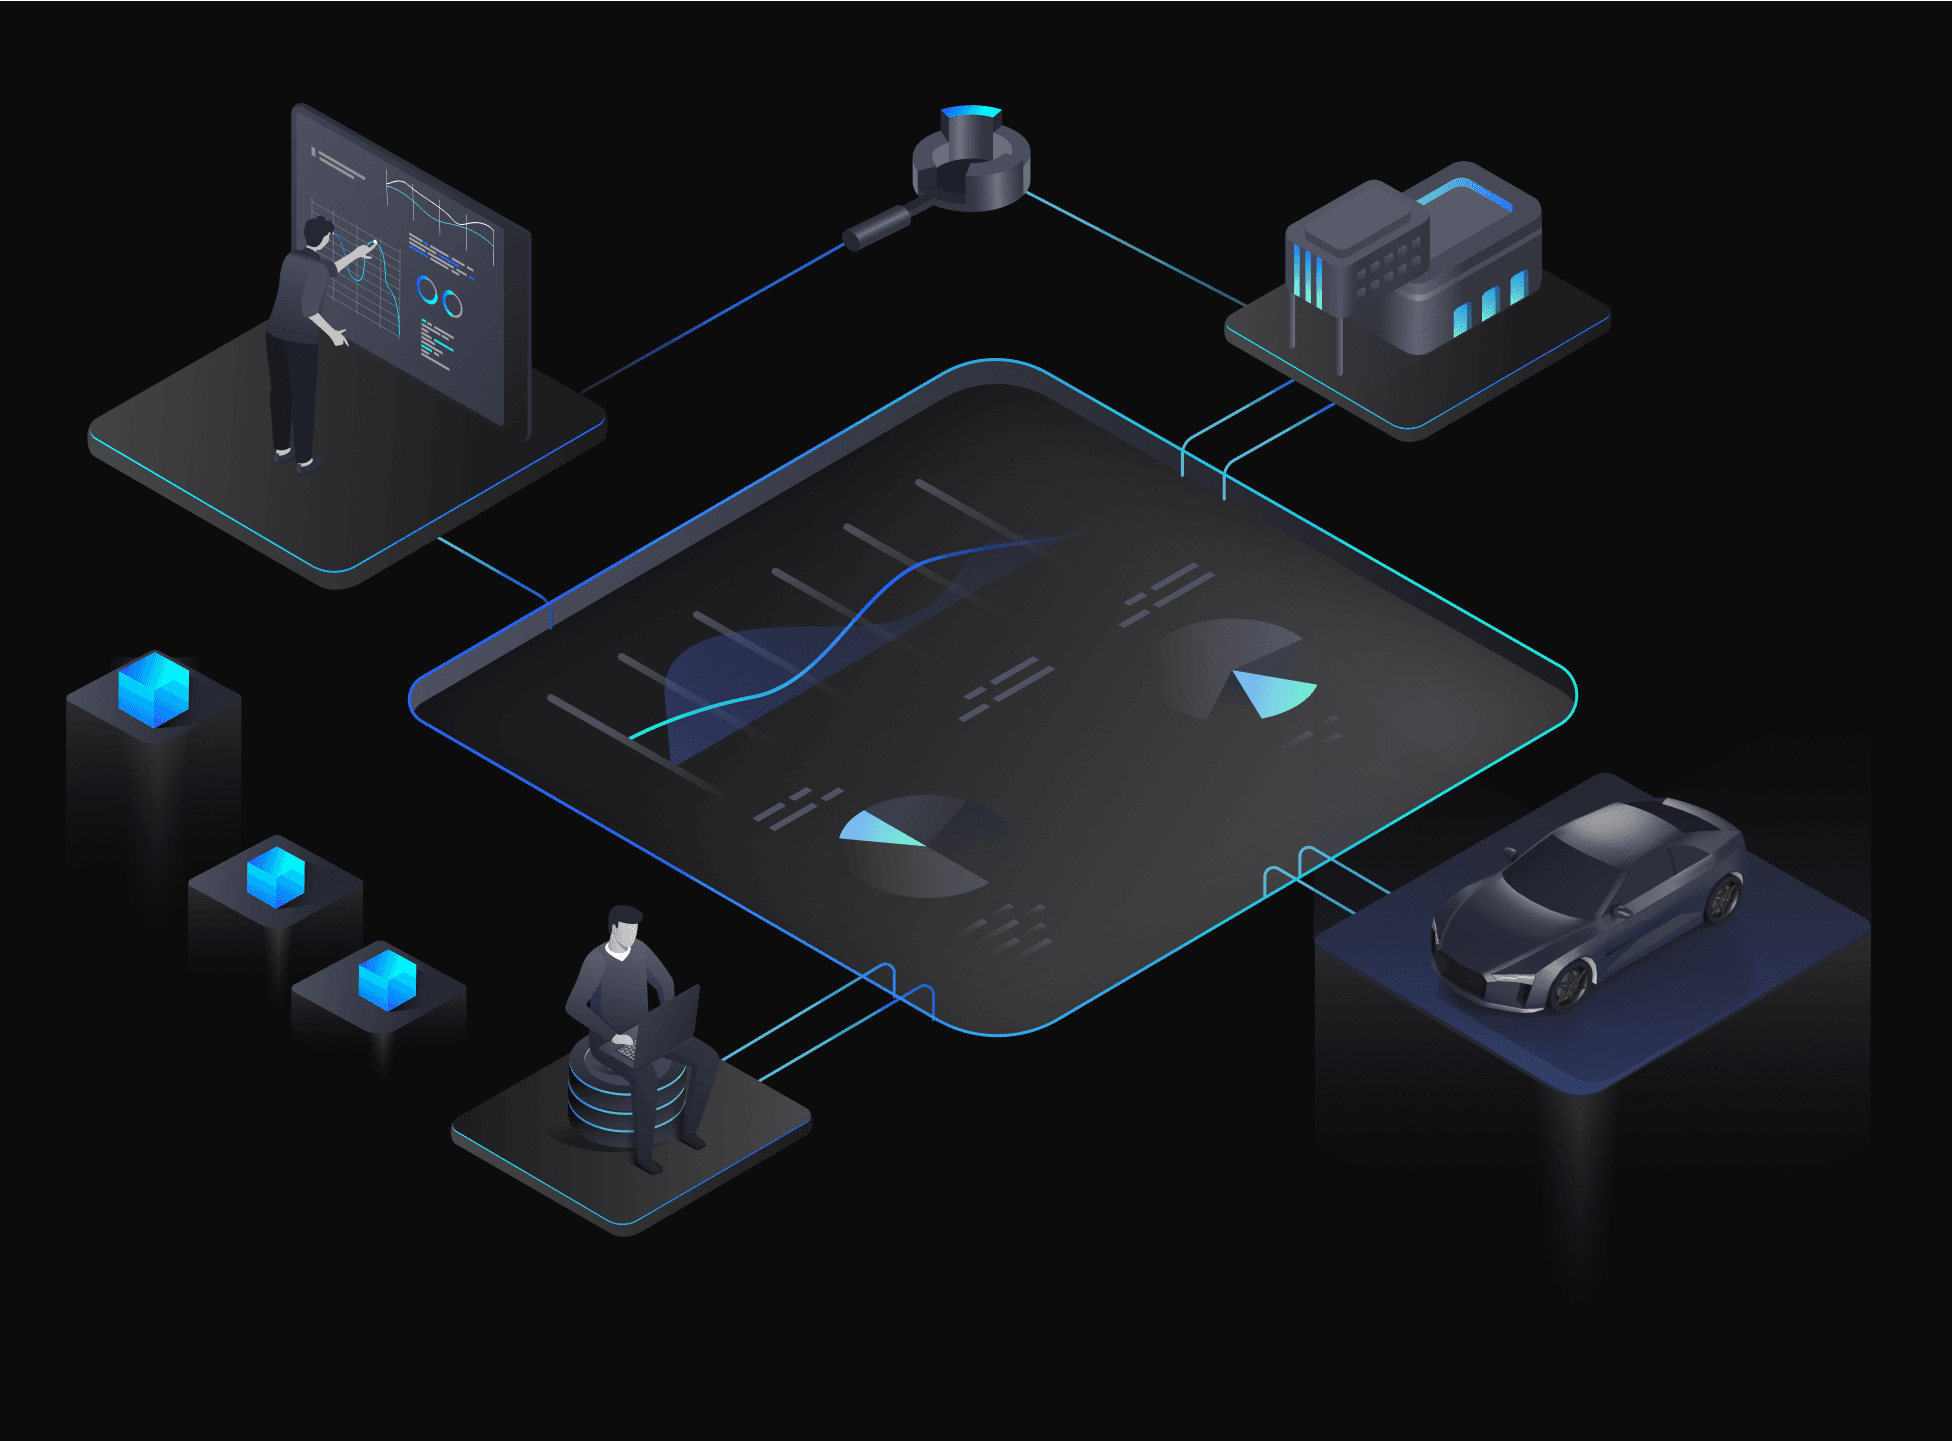 Tekion Advanced Analytics hero image that shows connections between every aspect of the dealership to help shape profitable futures